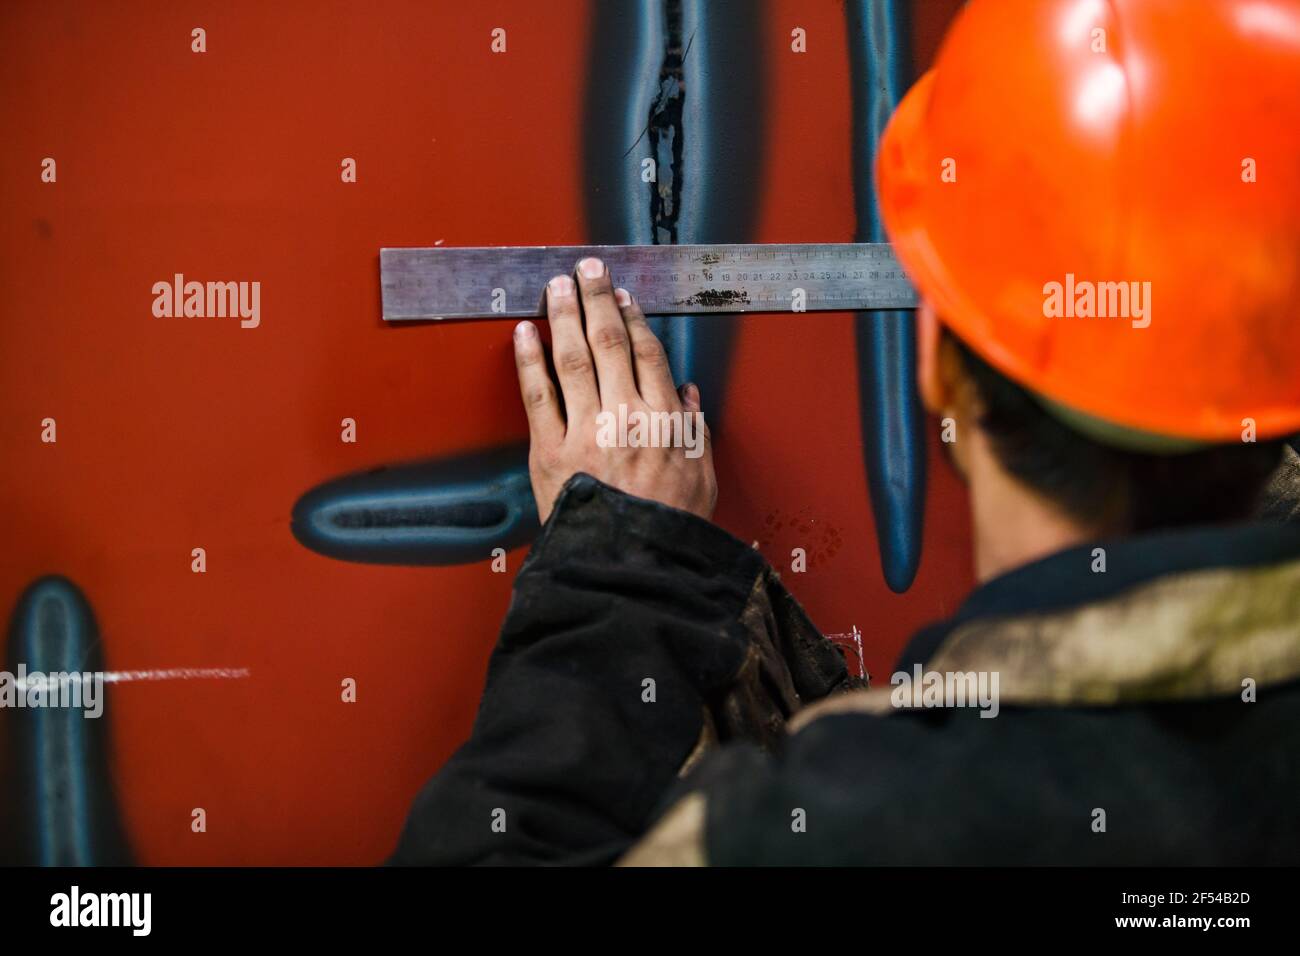 Ekibastuz, Pavlodar region, Kazakhstan May 28 2012: Train car-building plant. Young worker marking car with steel ruler and chalk. no face, hand only. Stock Photo